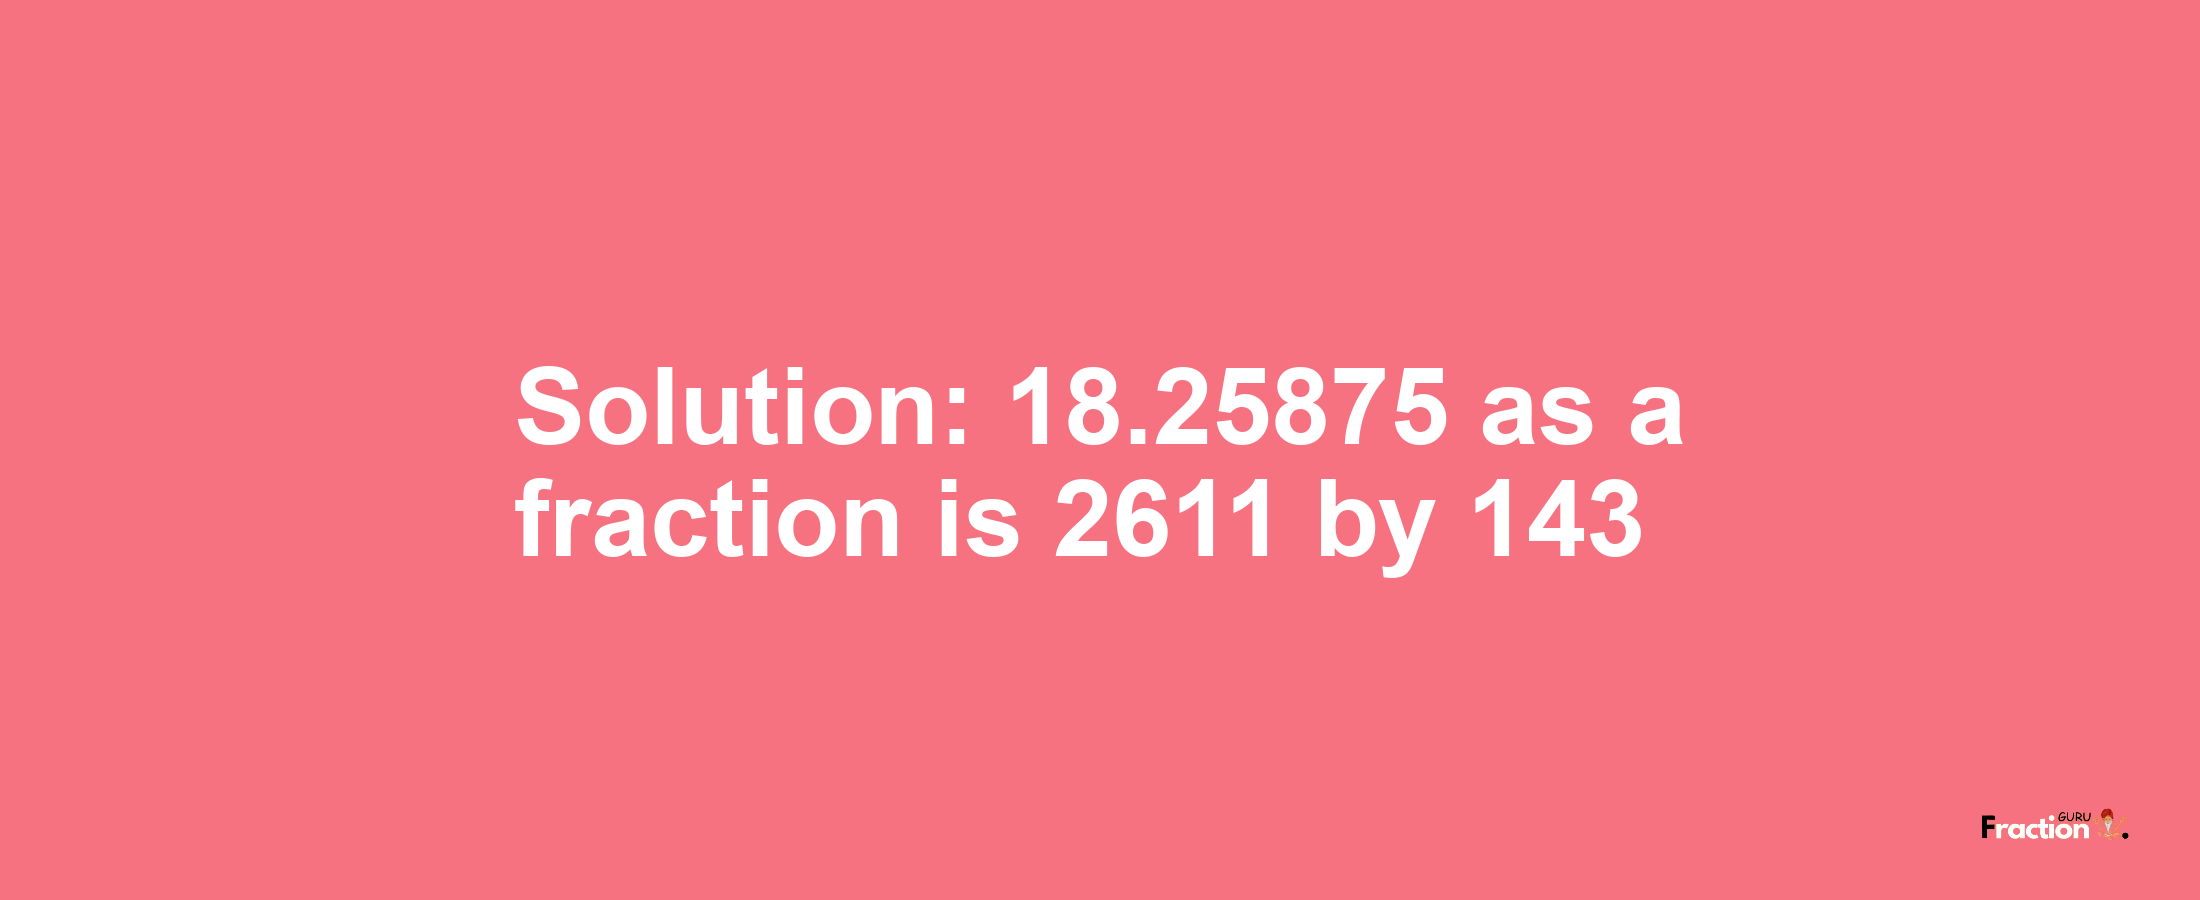 Solution:18.25875 as a fraction is 2611/143